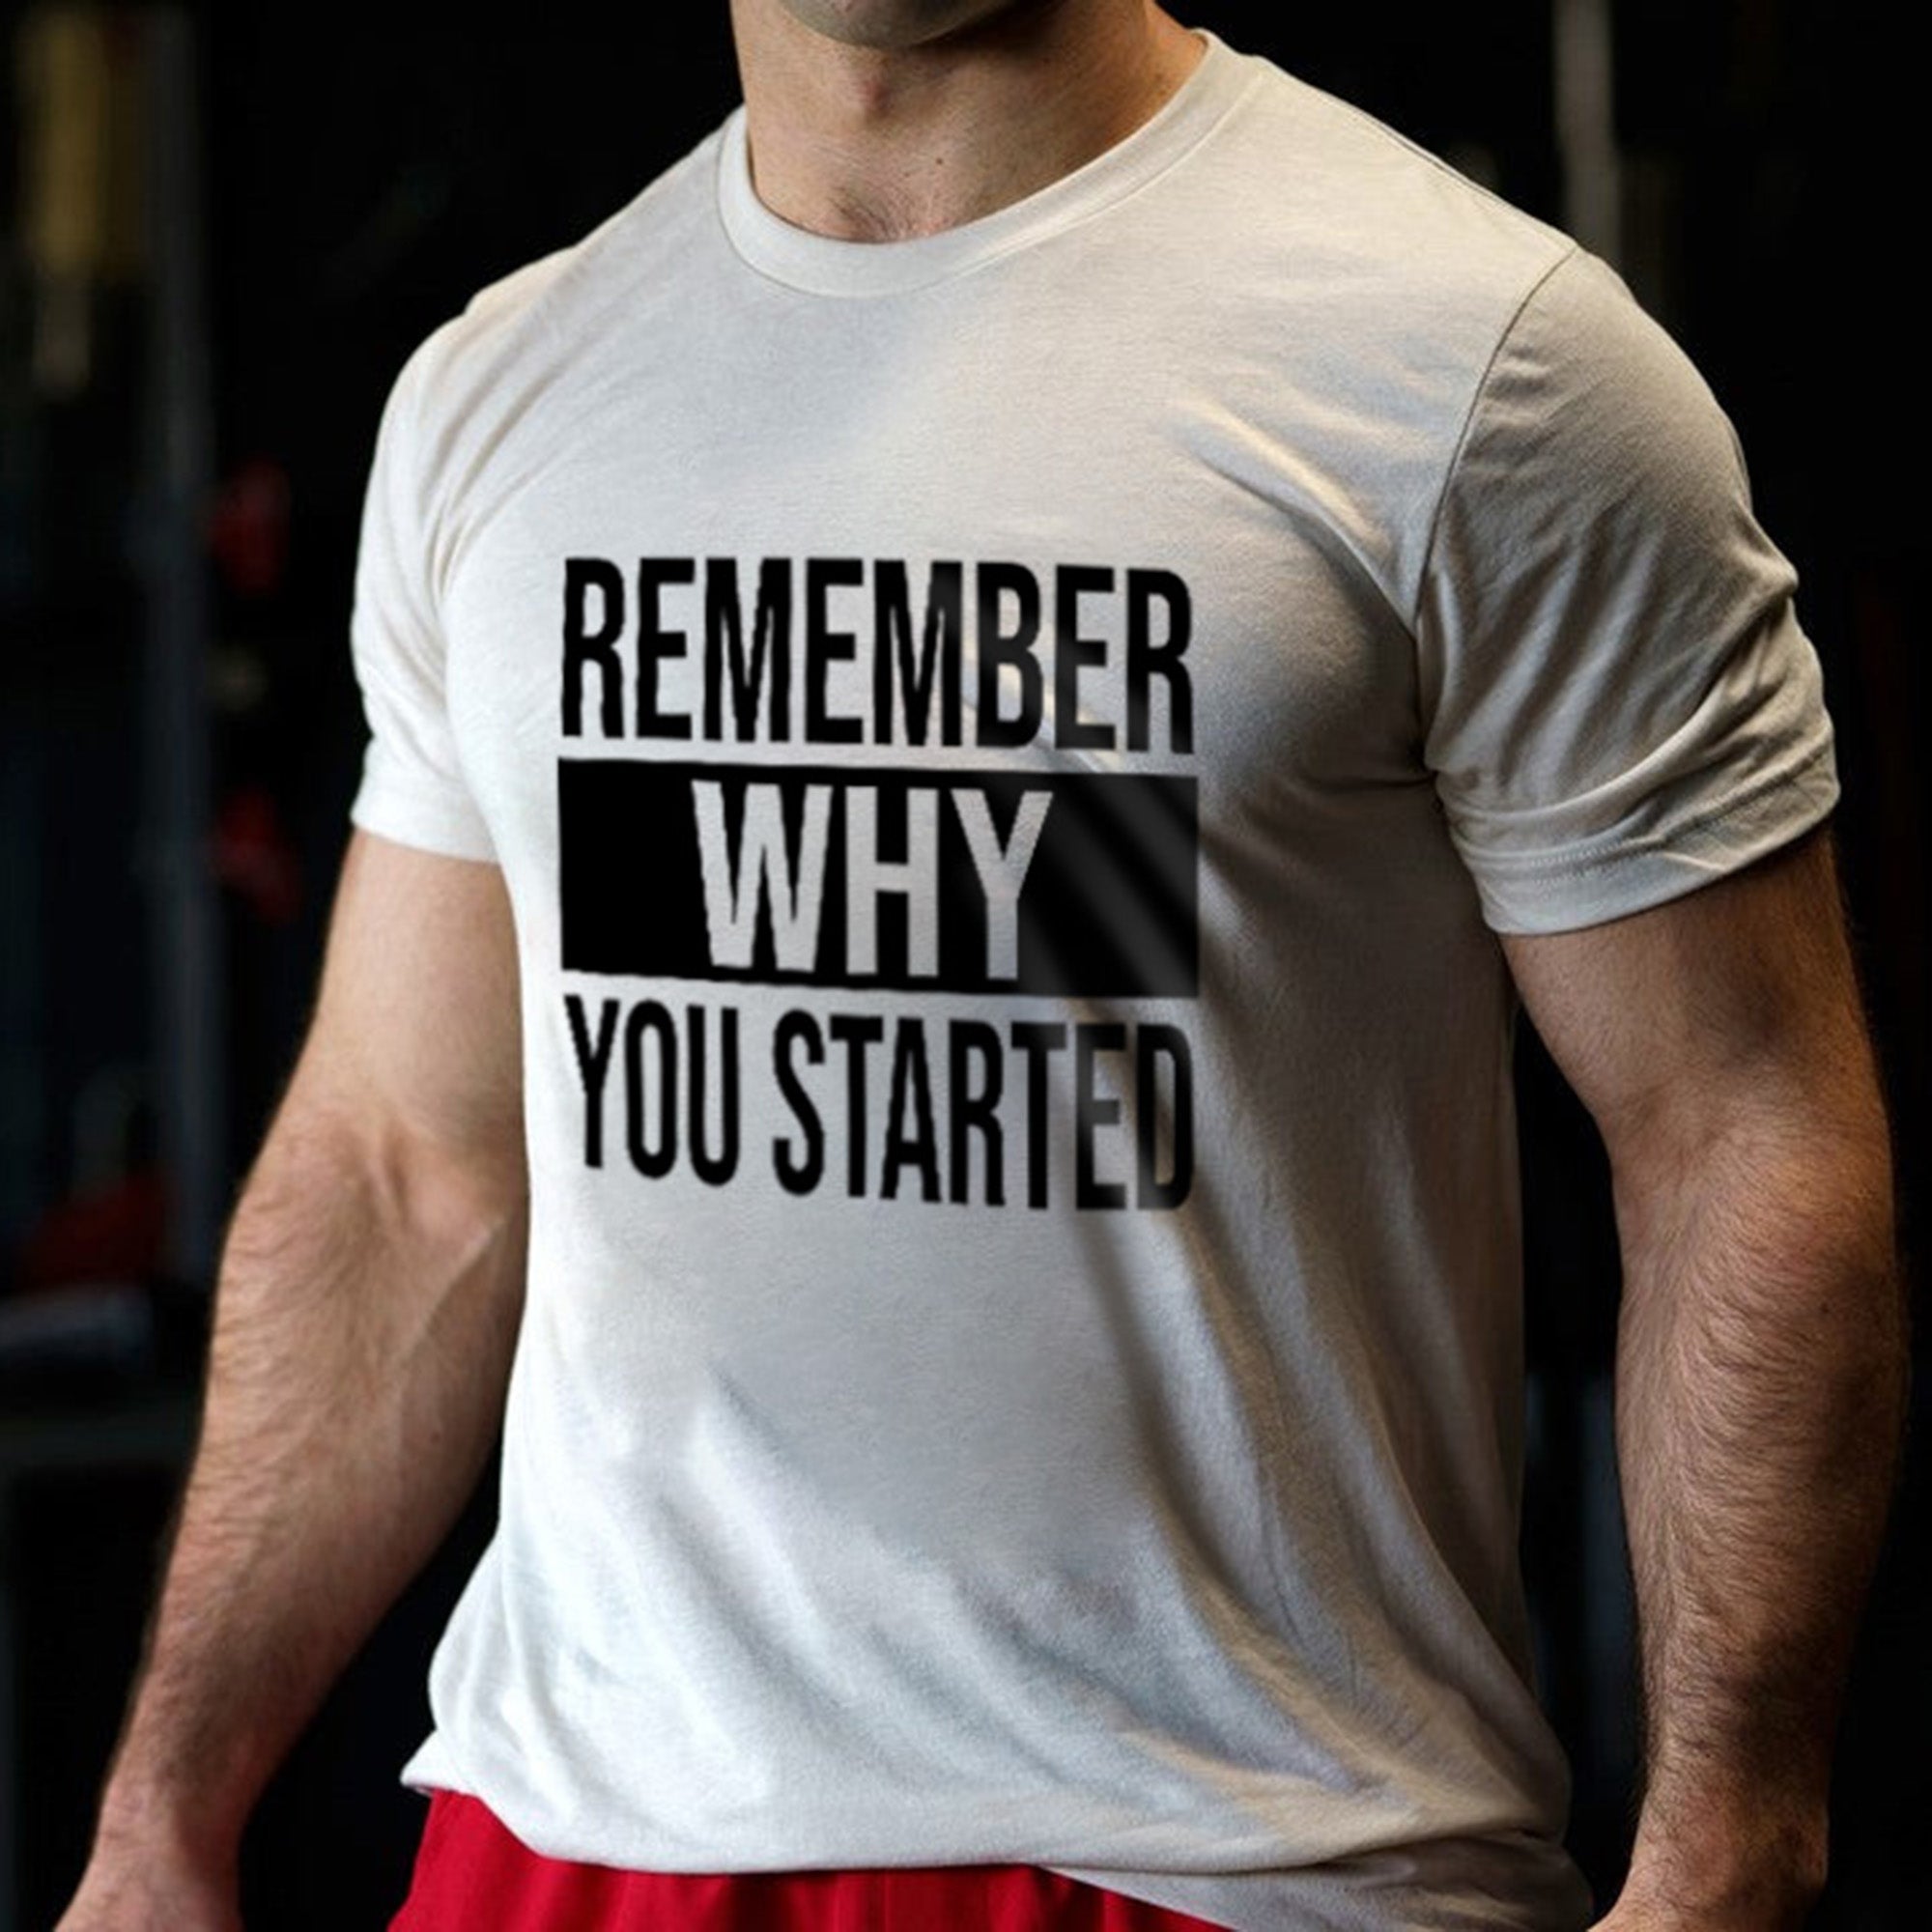 Remember Why You Started Printed Men's T-shirt